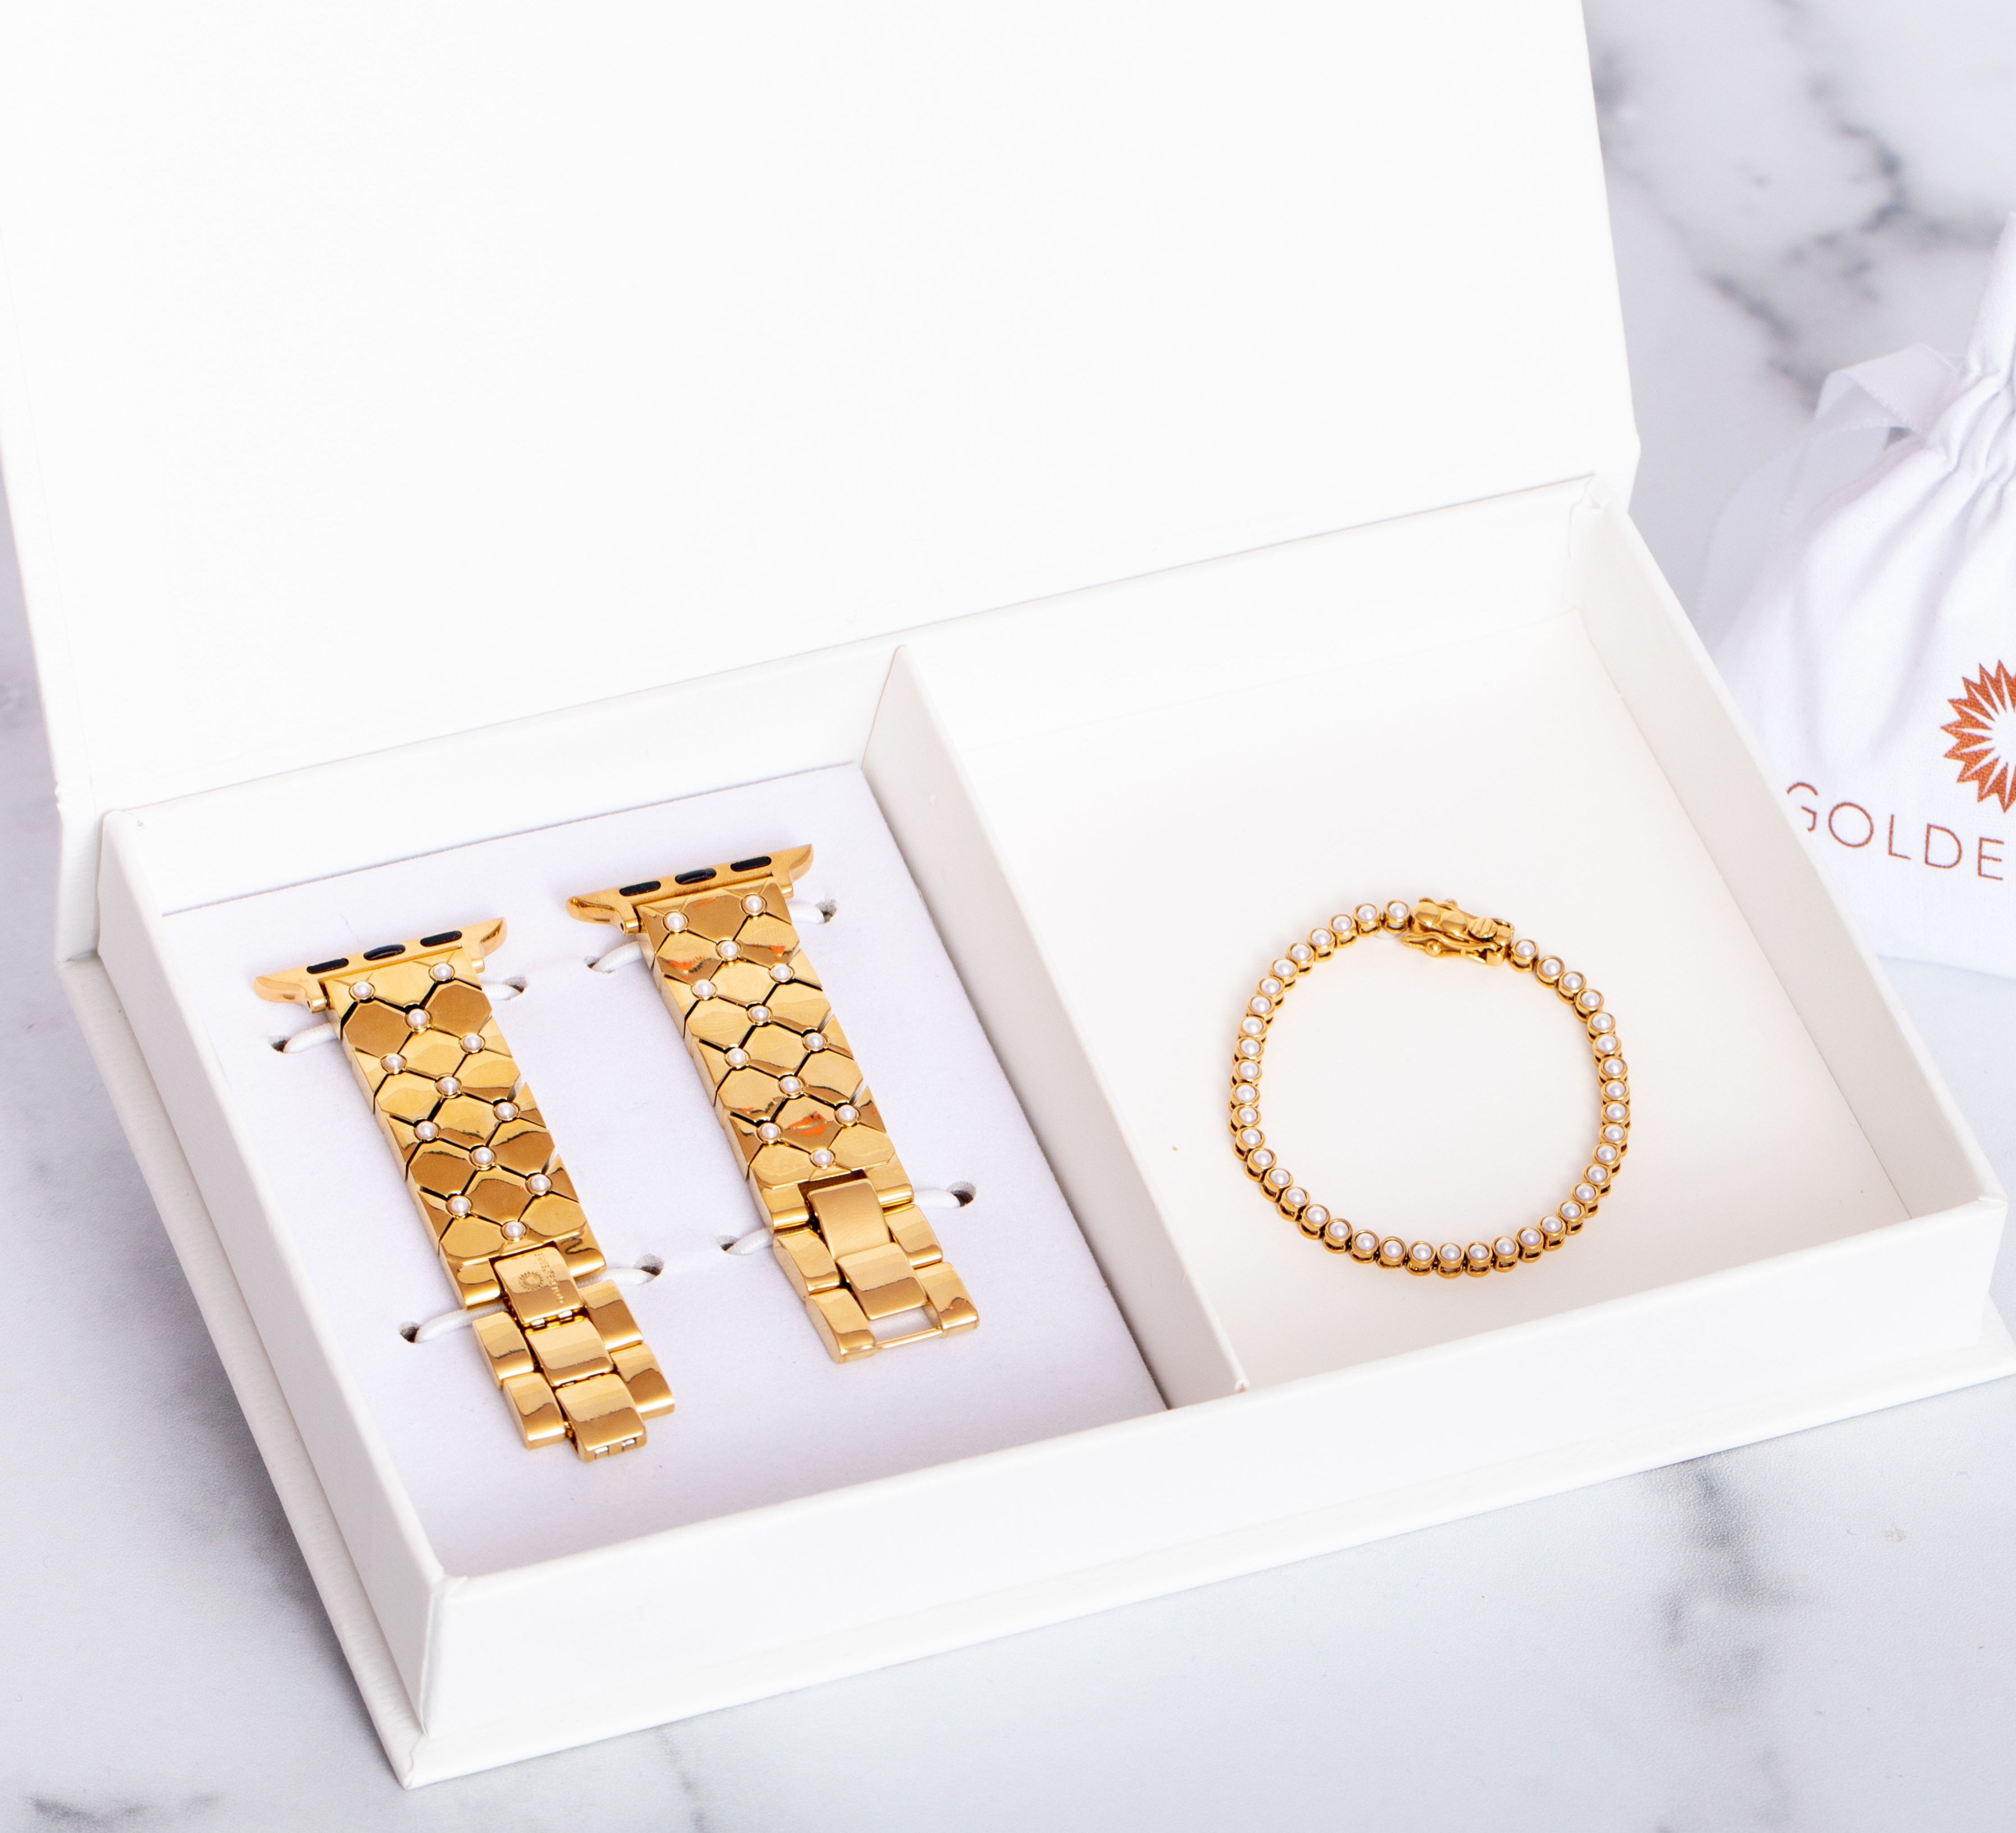 Pearl Band Gift Set - Goldenerre Women's Apple Watch Bands and Jewelry